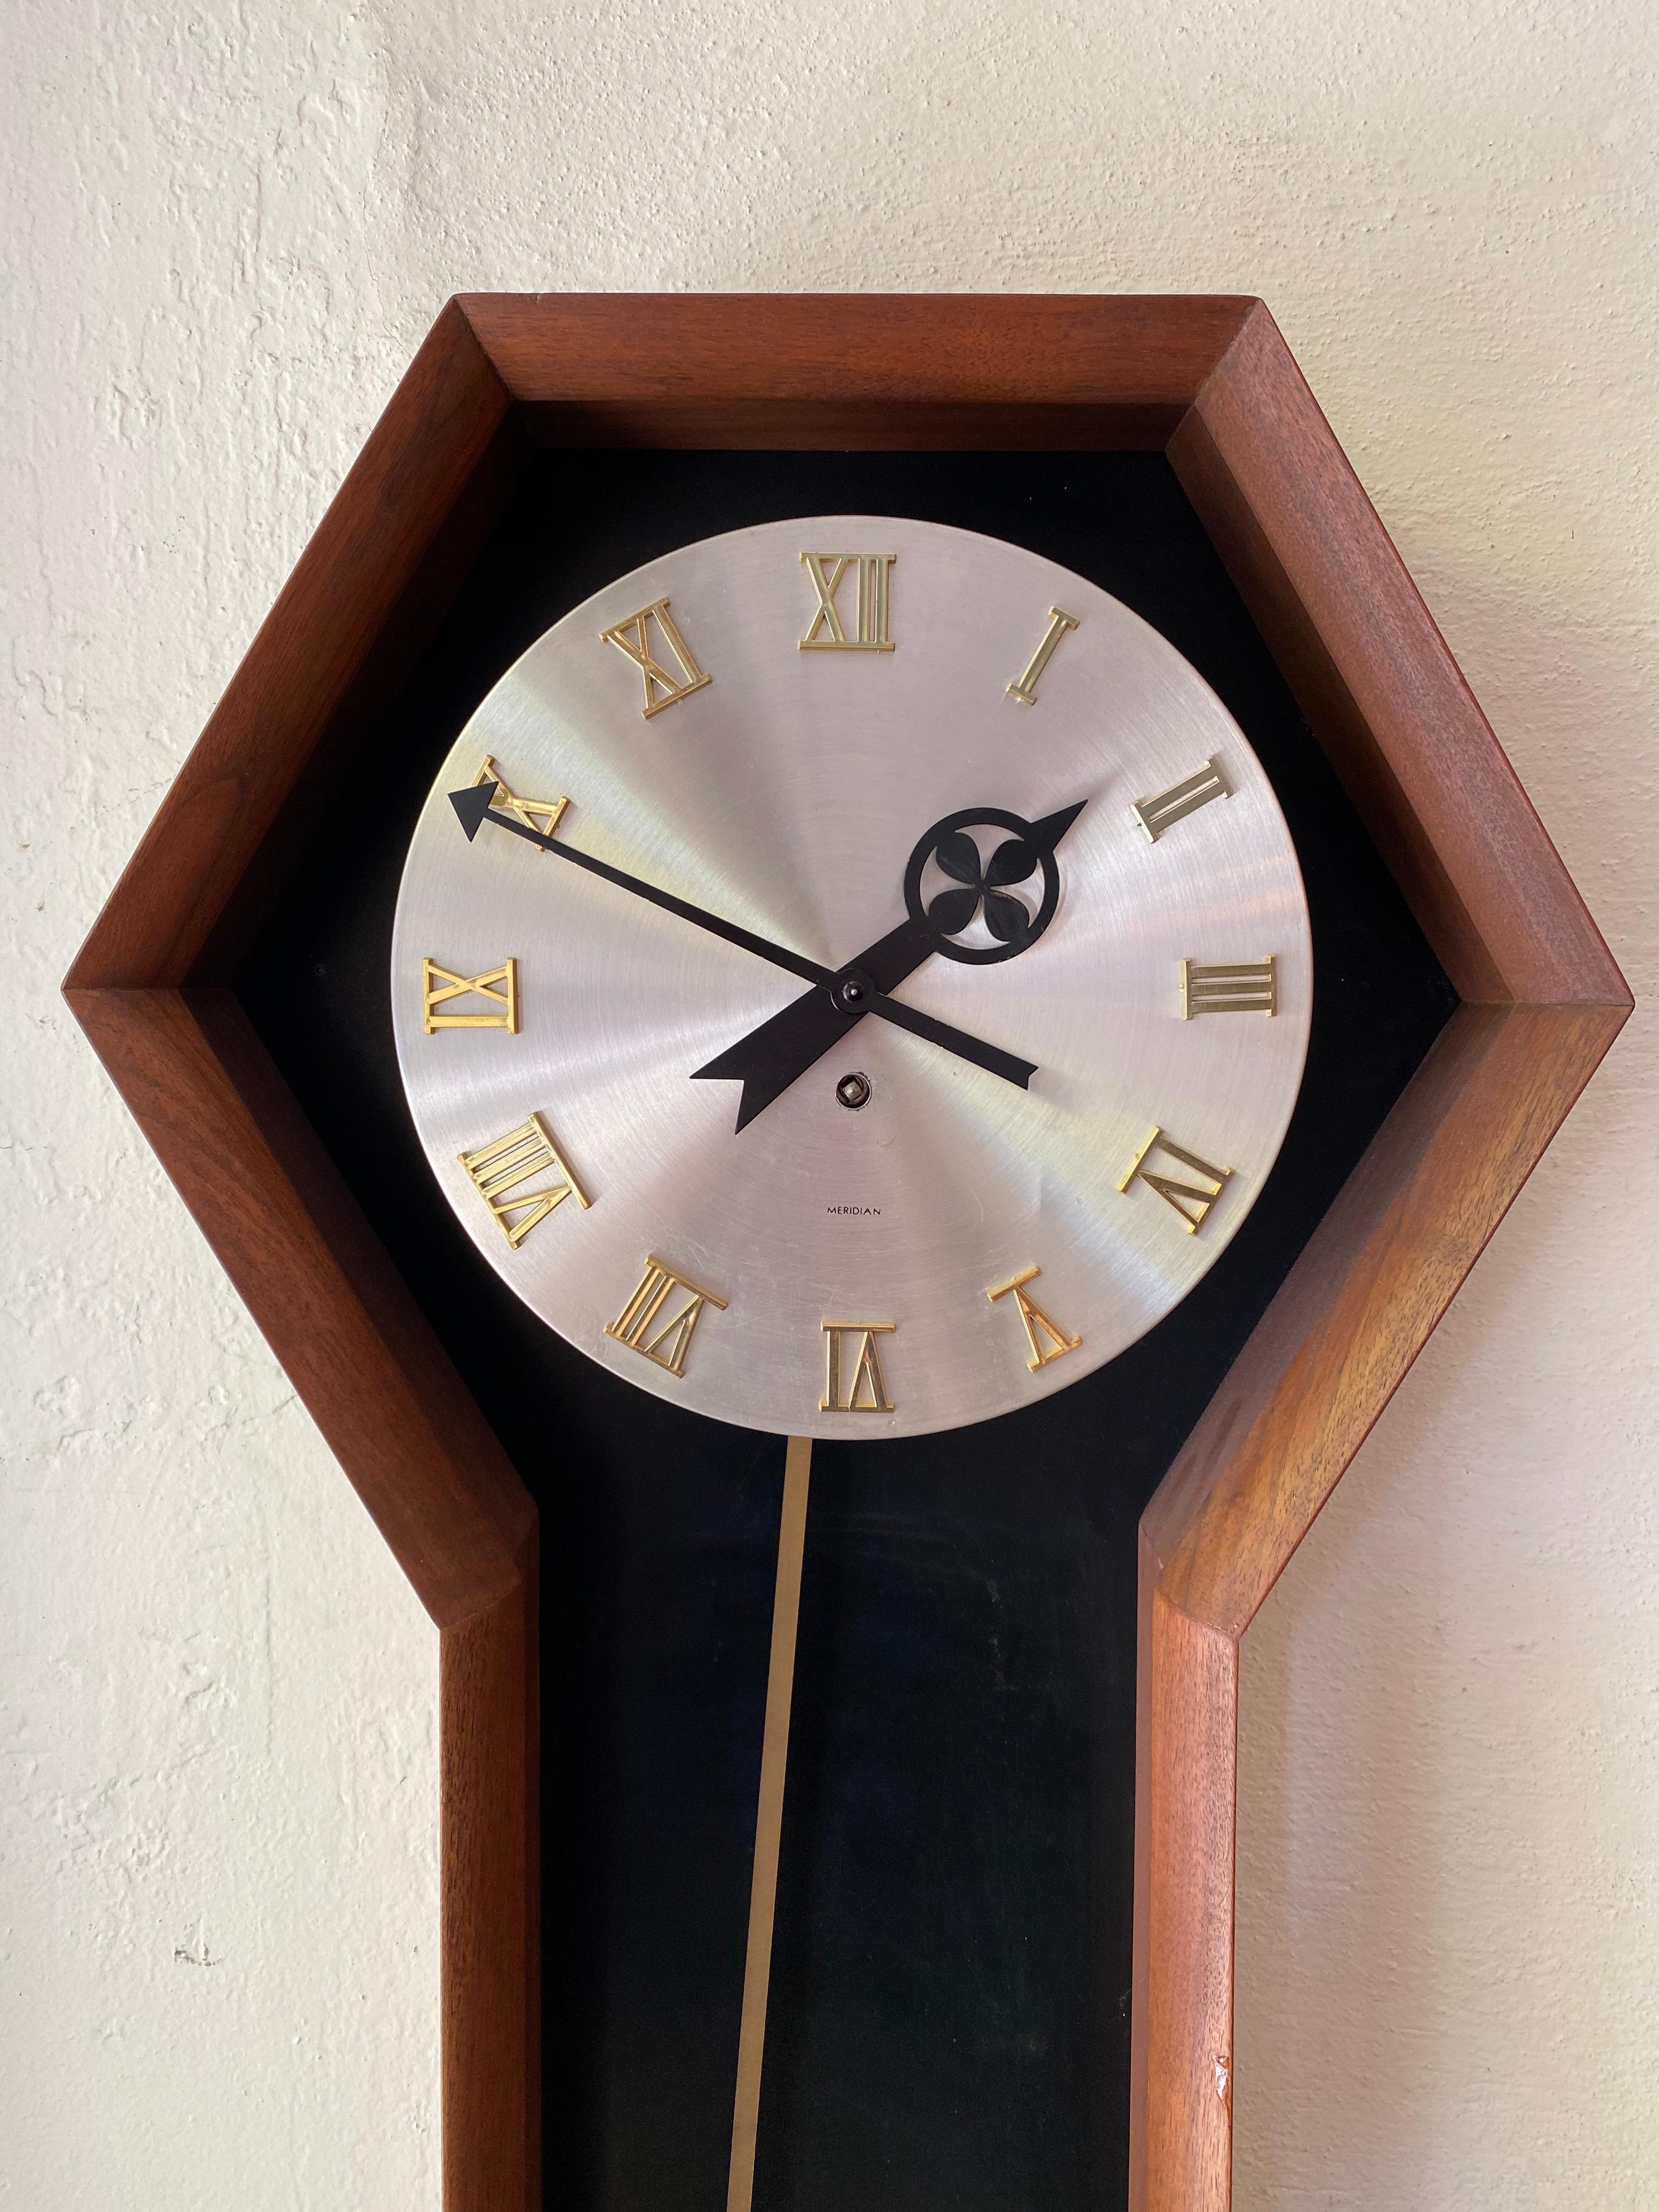 
Arthur Umanoff Meridian/ Howard Miller Wind Up Wall Clock. In good working Condition, currently hanging in the store and keeping perfect time. Includes Key